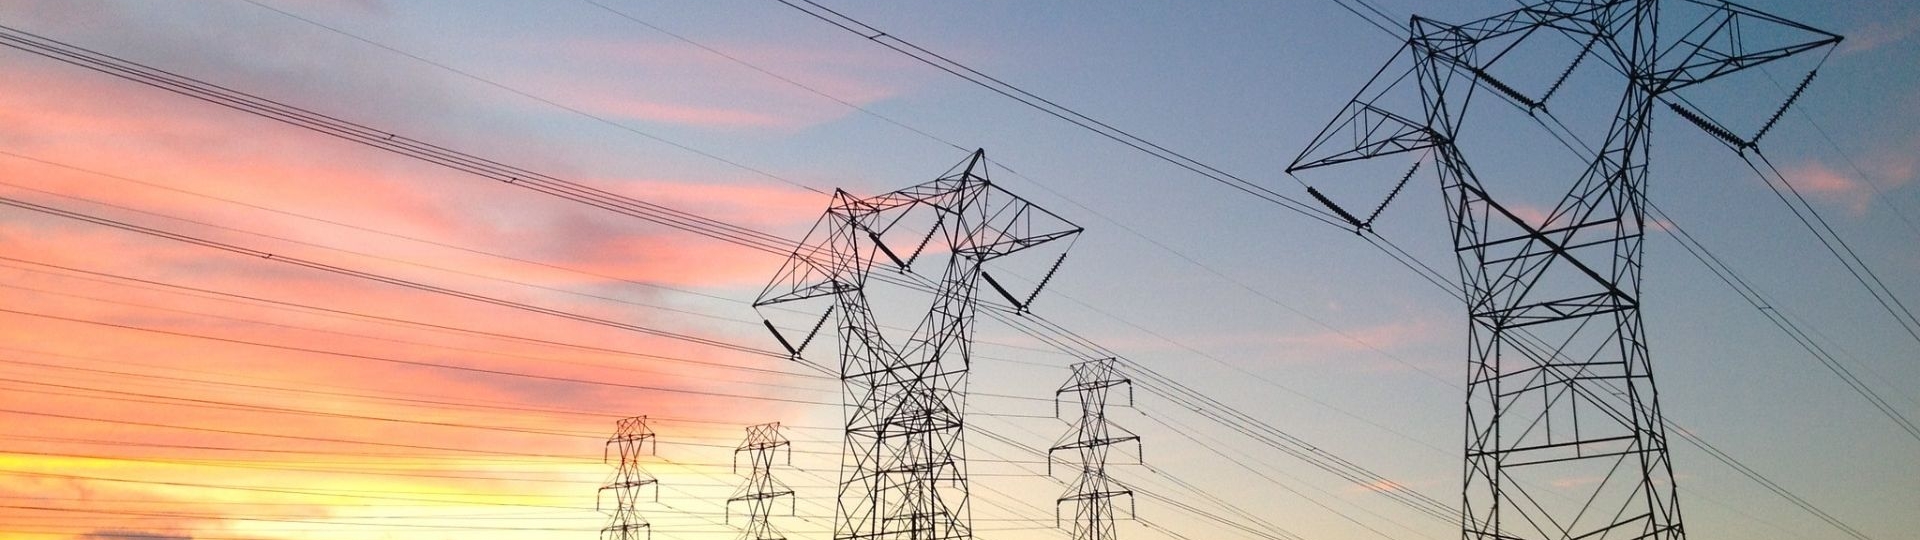 Hydro lines at sunset